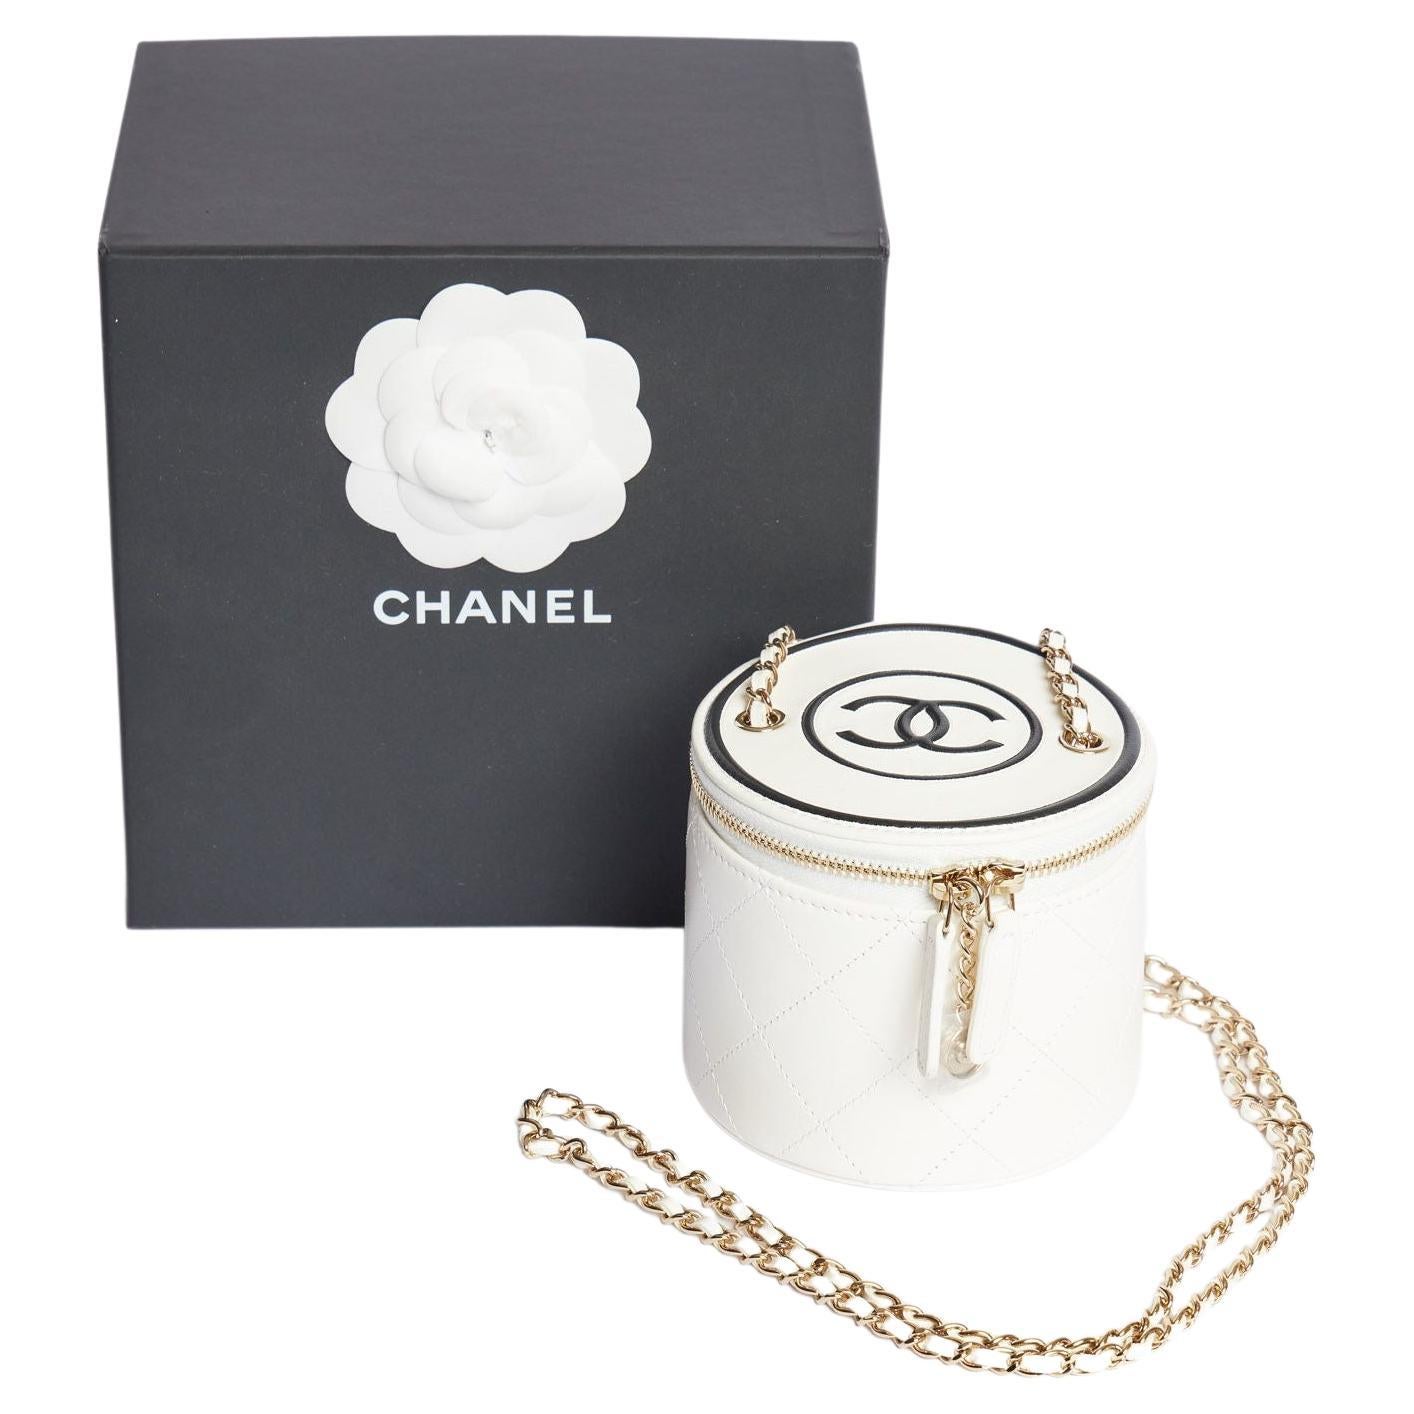 Does an iPhone fit in the Chanel Mini Vanity?